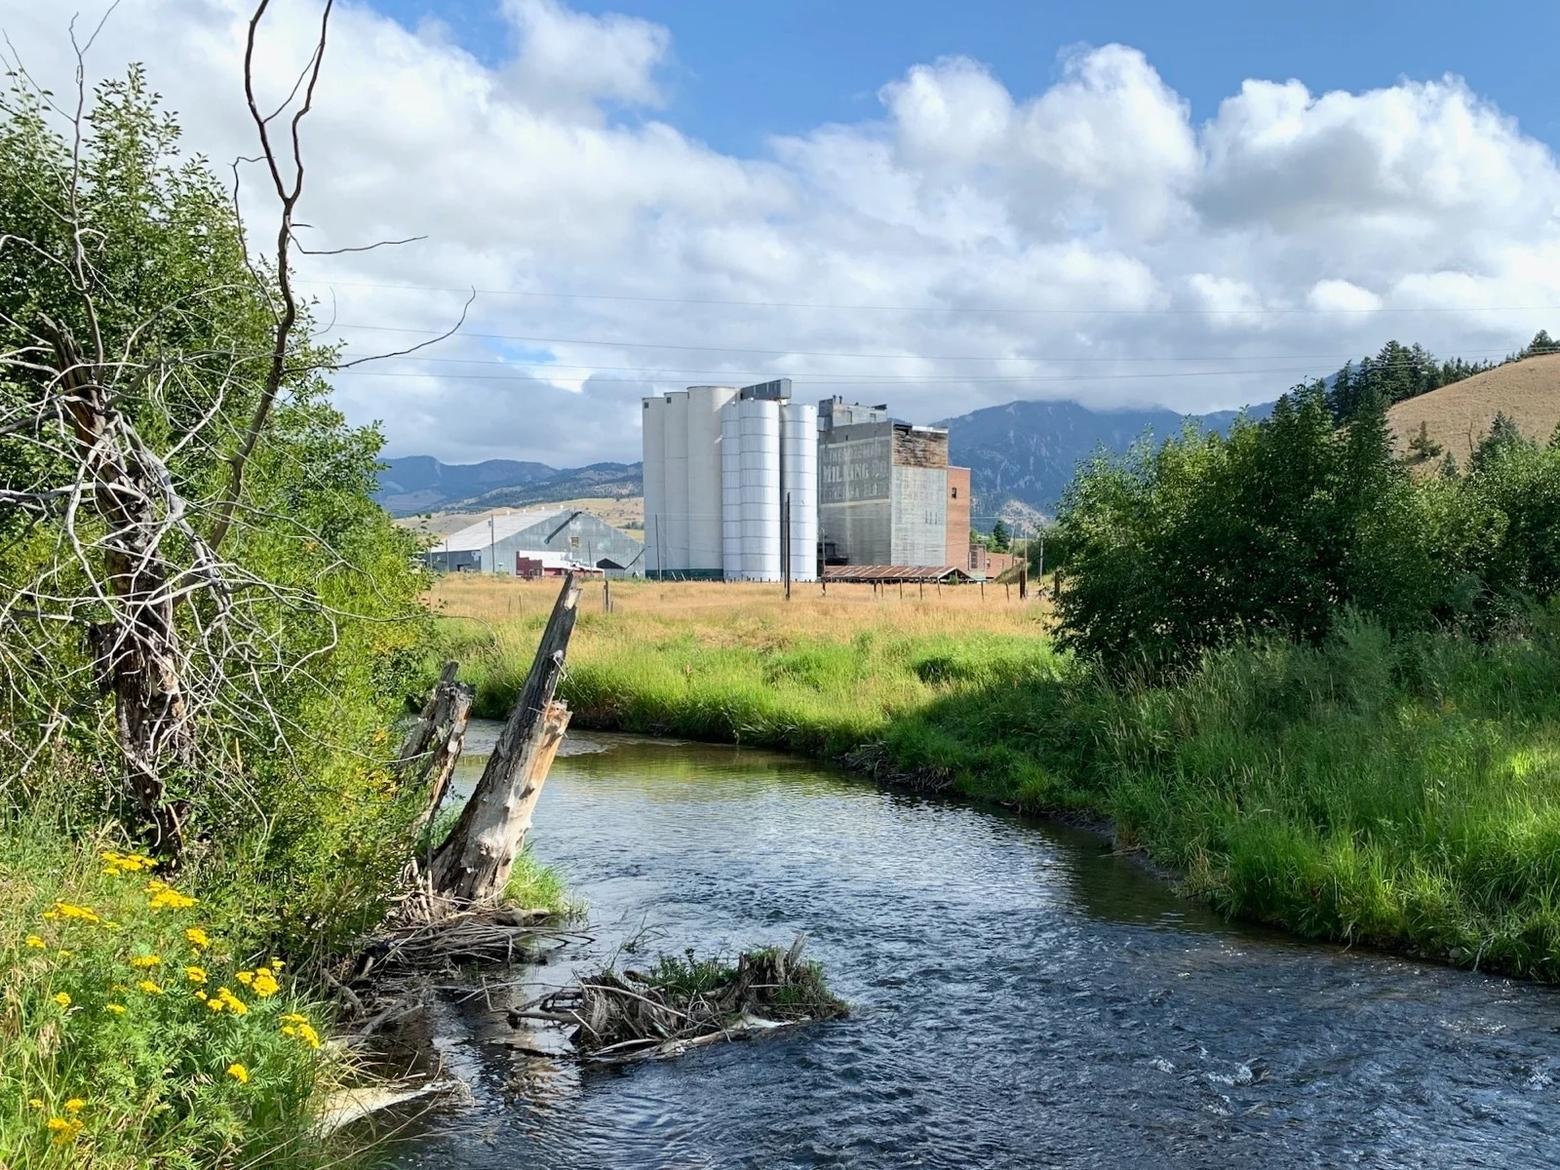 The East Gallatin flows near the old Story Mill at the edge of Bozeman. Both population growth and climate change are playing major roles in the future of the Gallatin River and East Gallatin. Photo courtesy Jon Catton